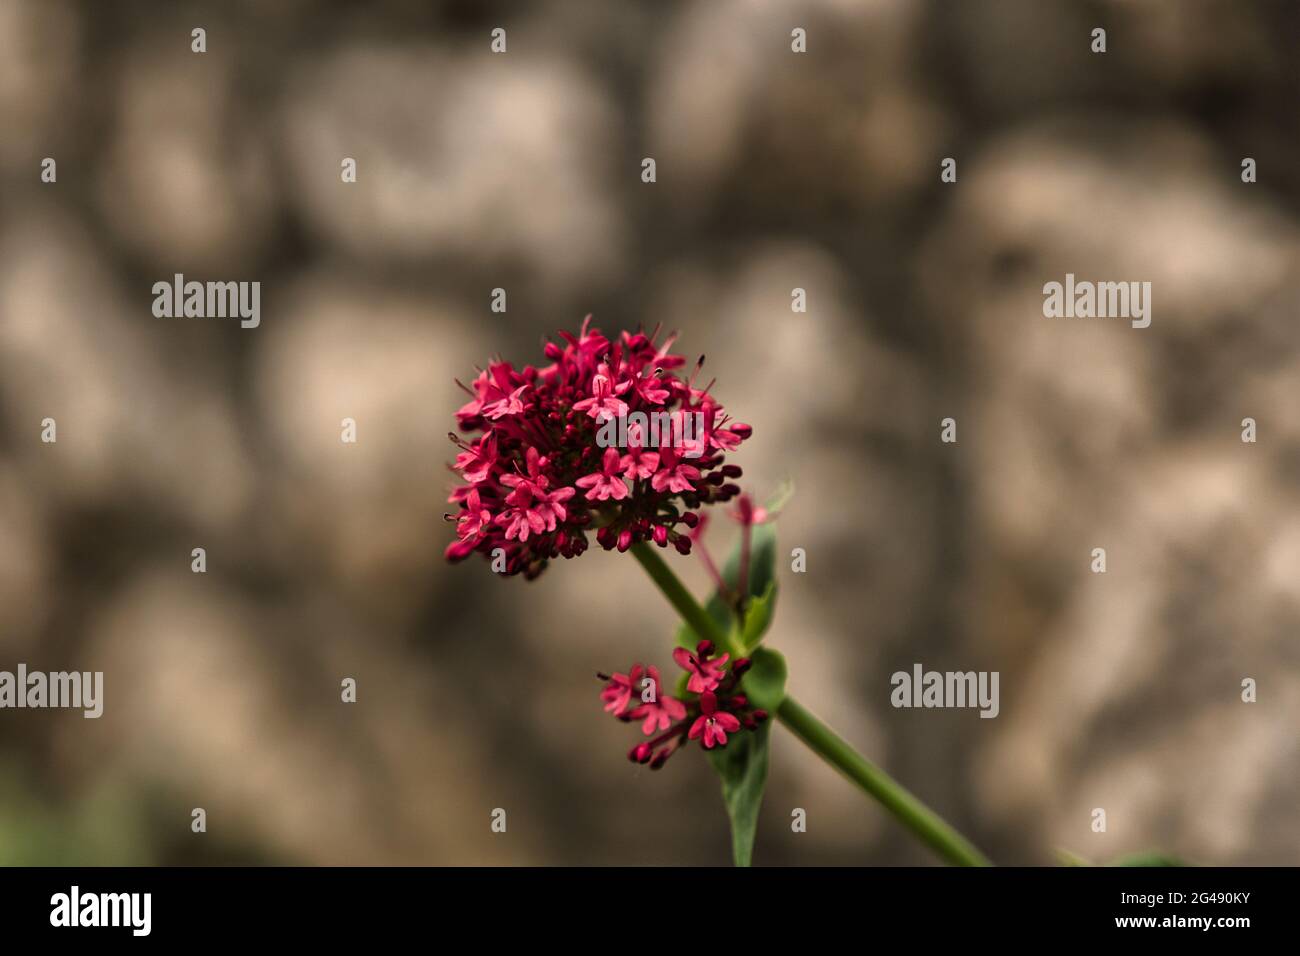 Shallow focus shot of red valerian flowers Stock Photo